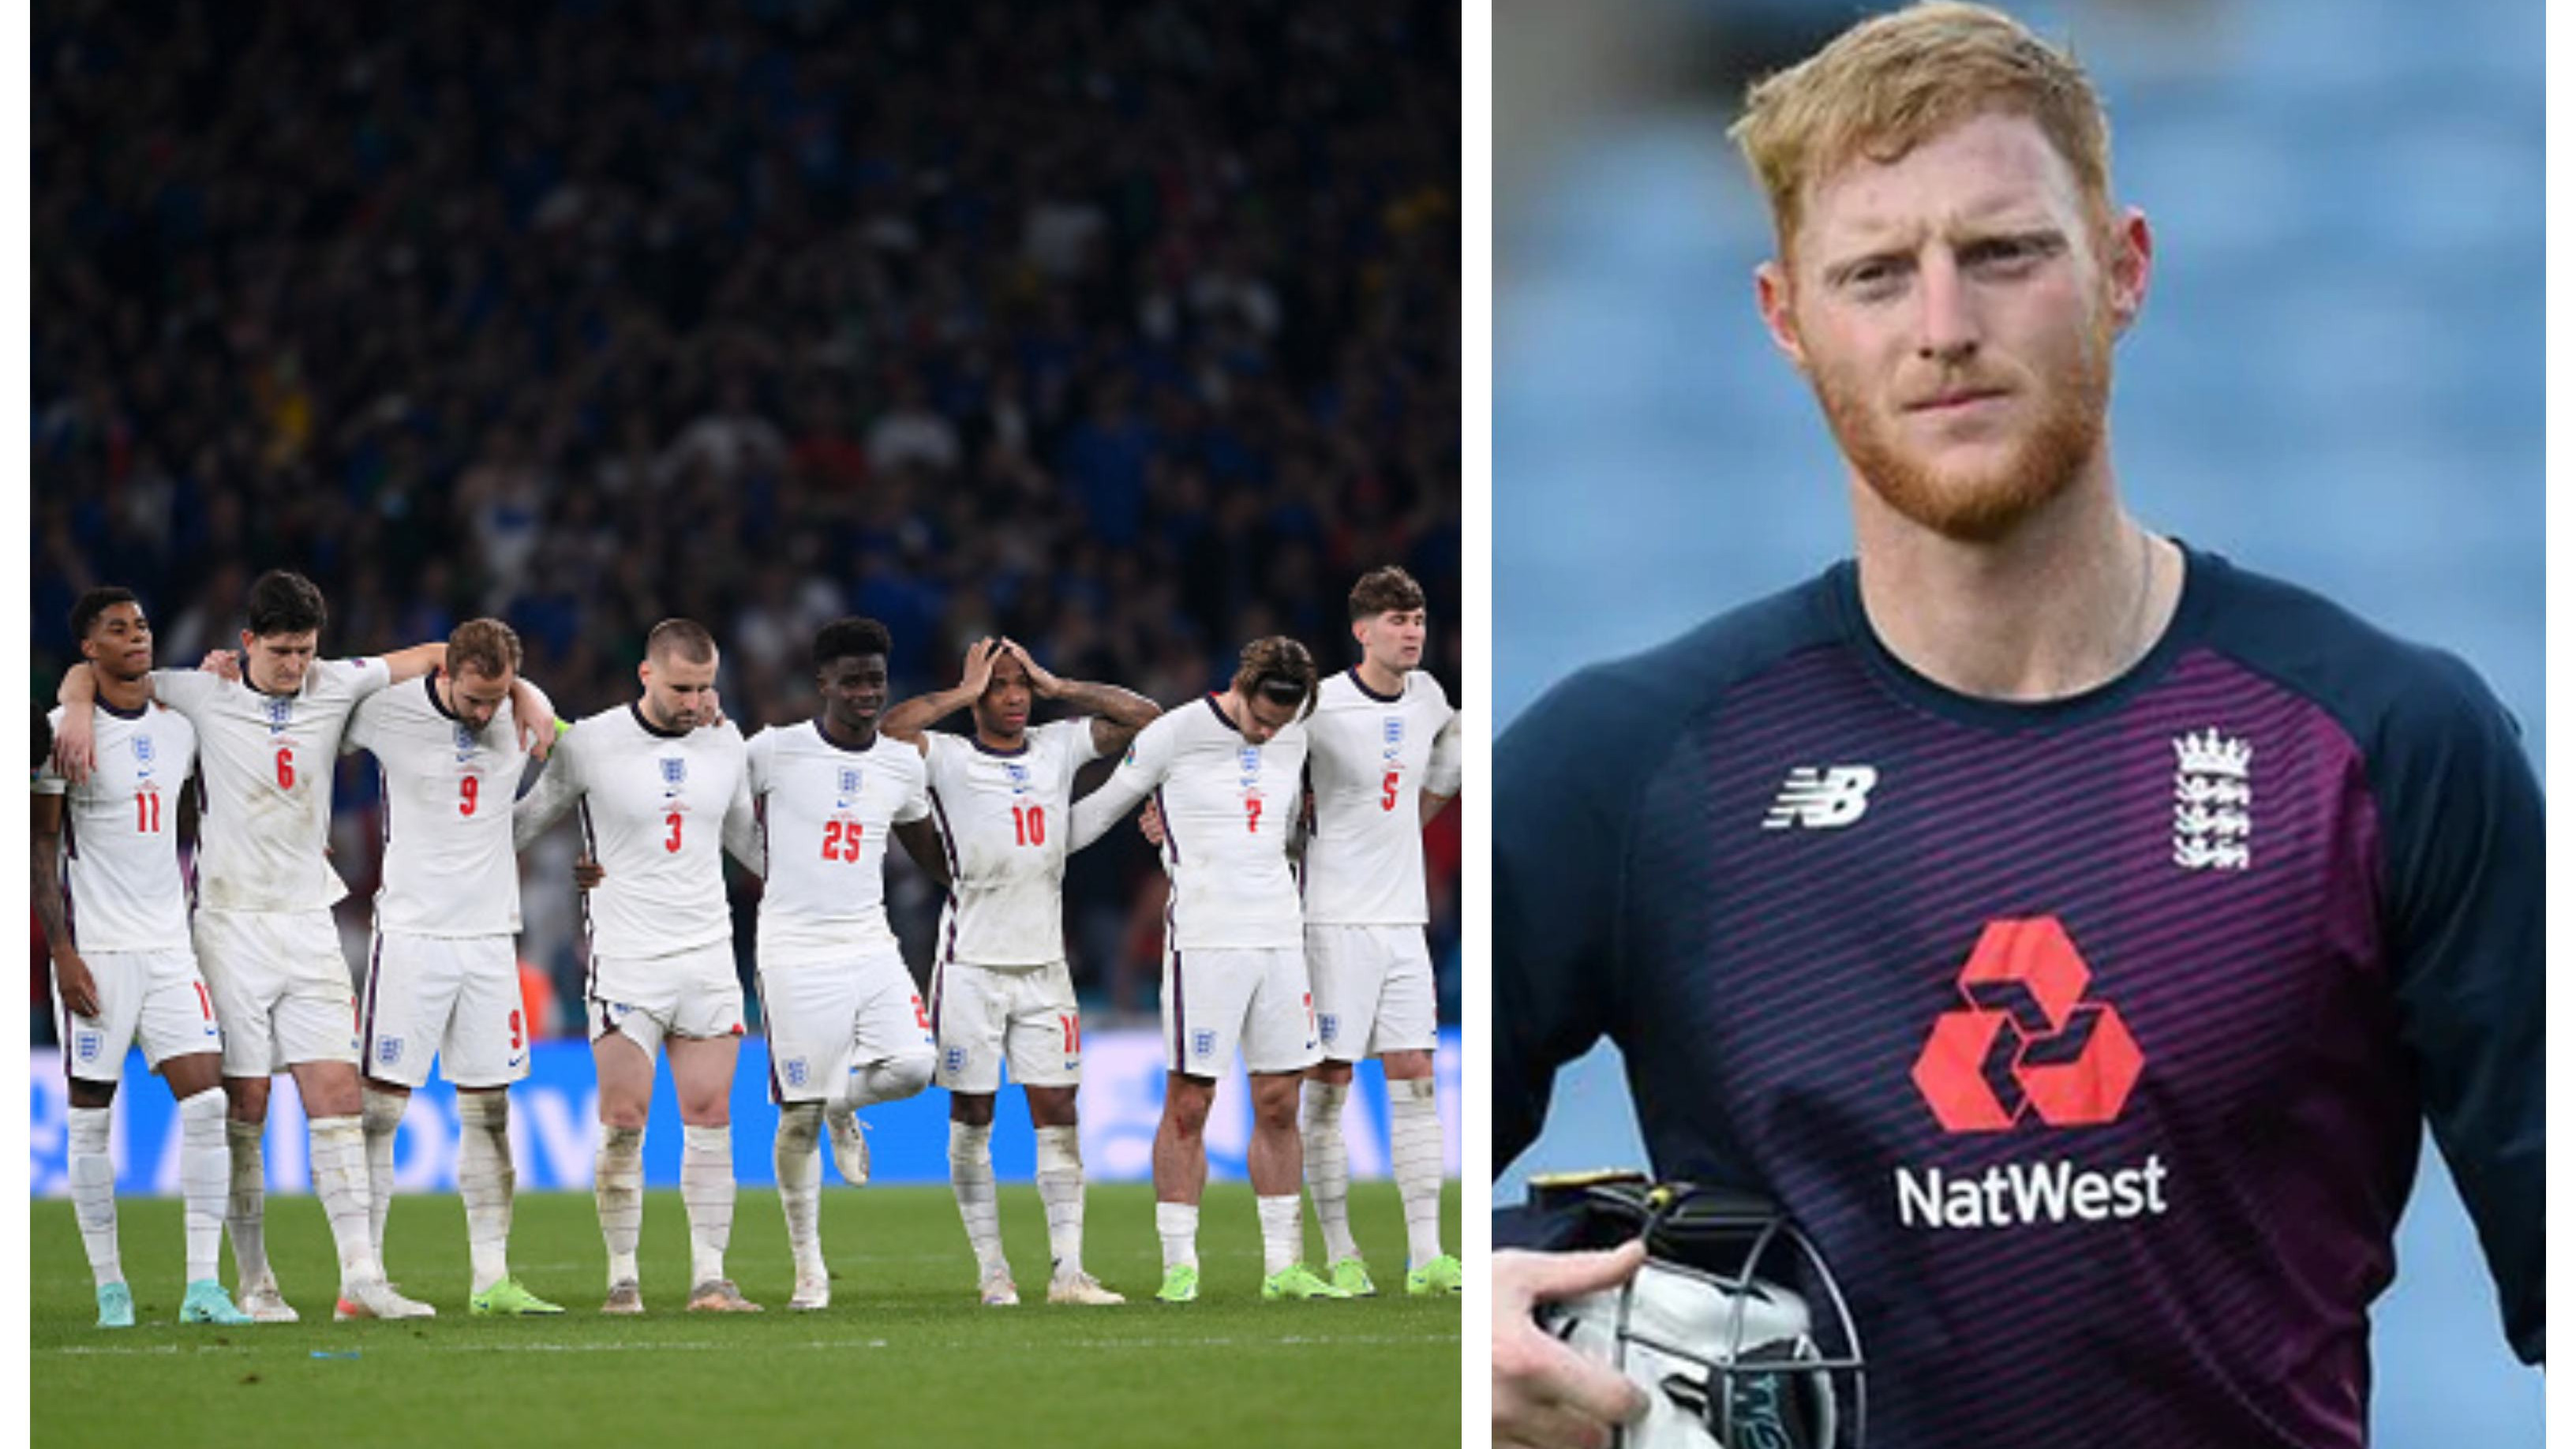 Ben Stokes hopes English football side not defined by Euro 2020 final result